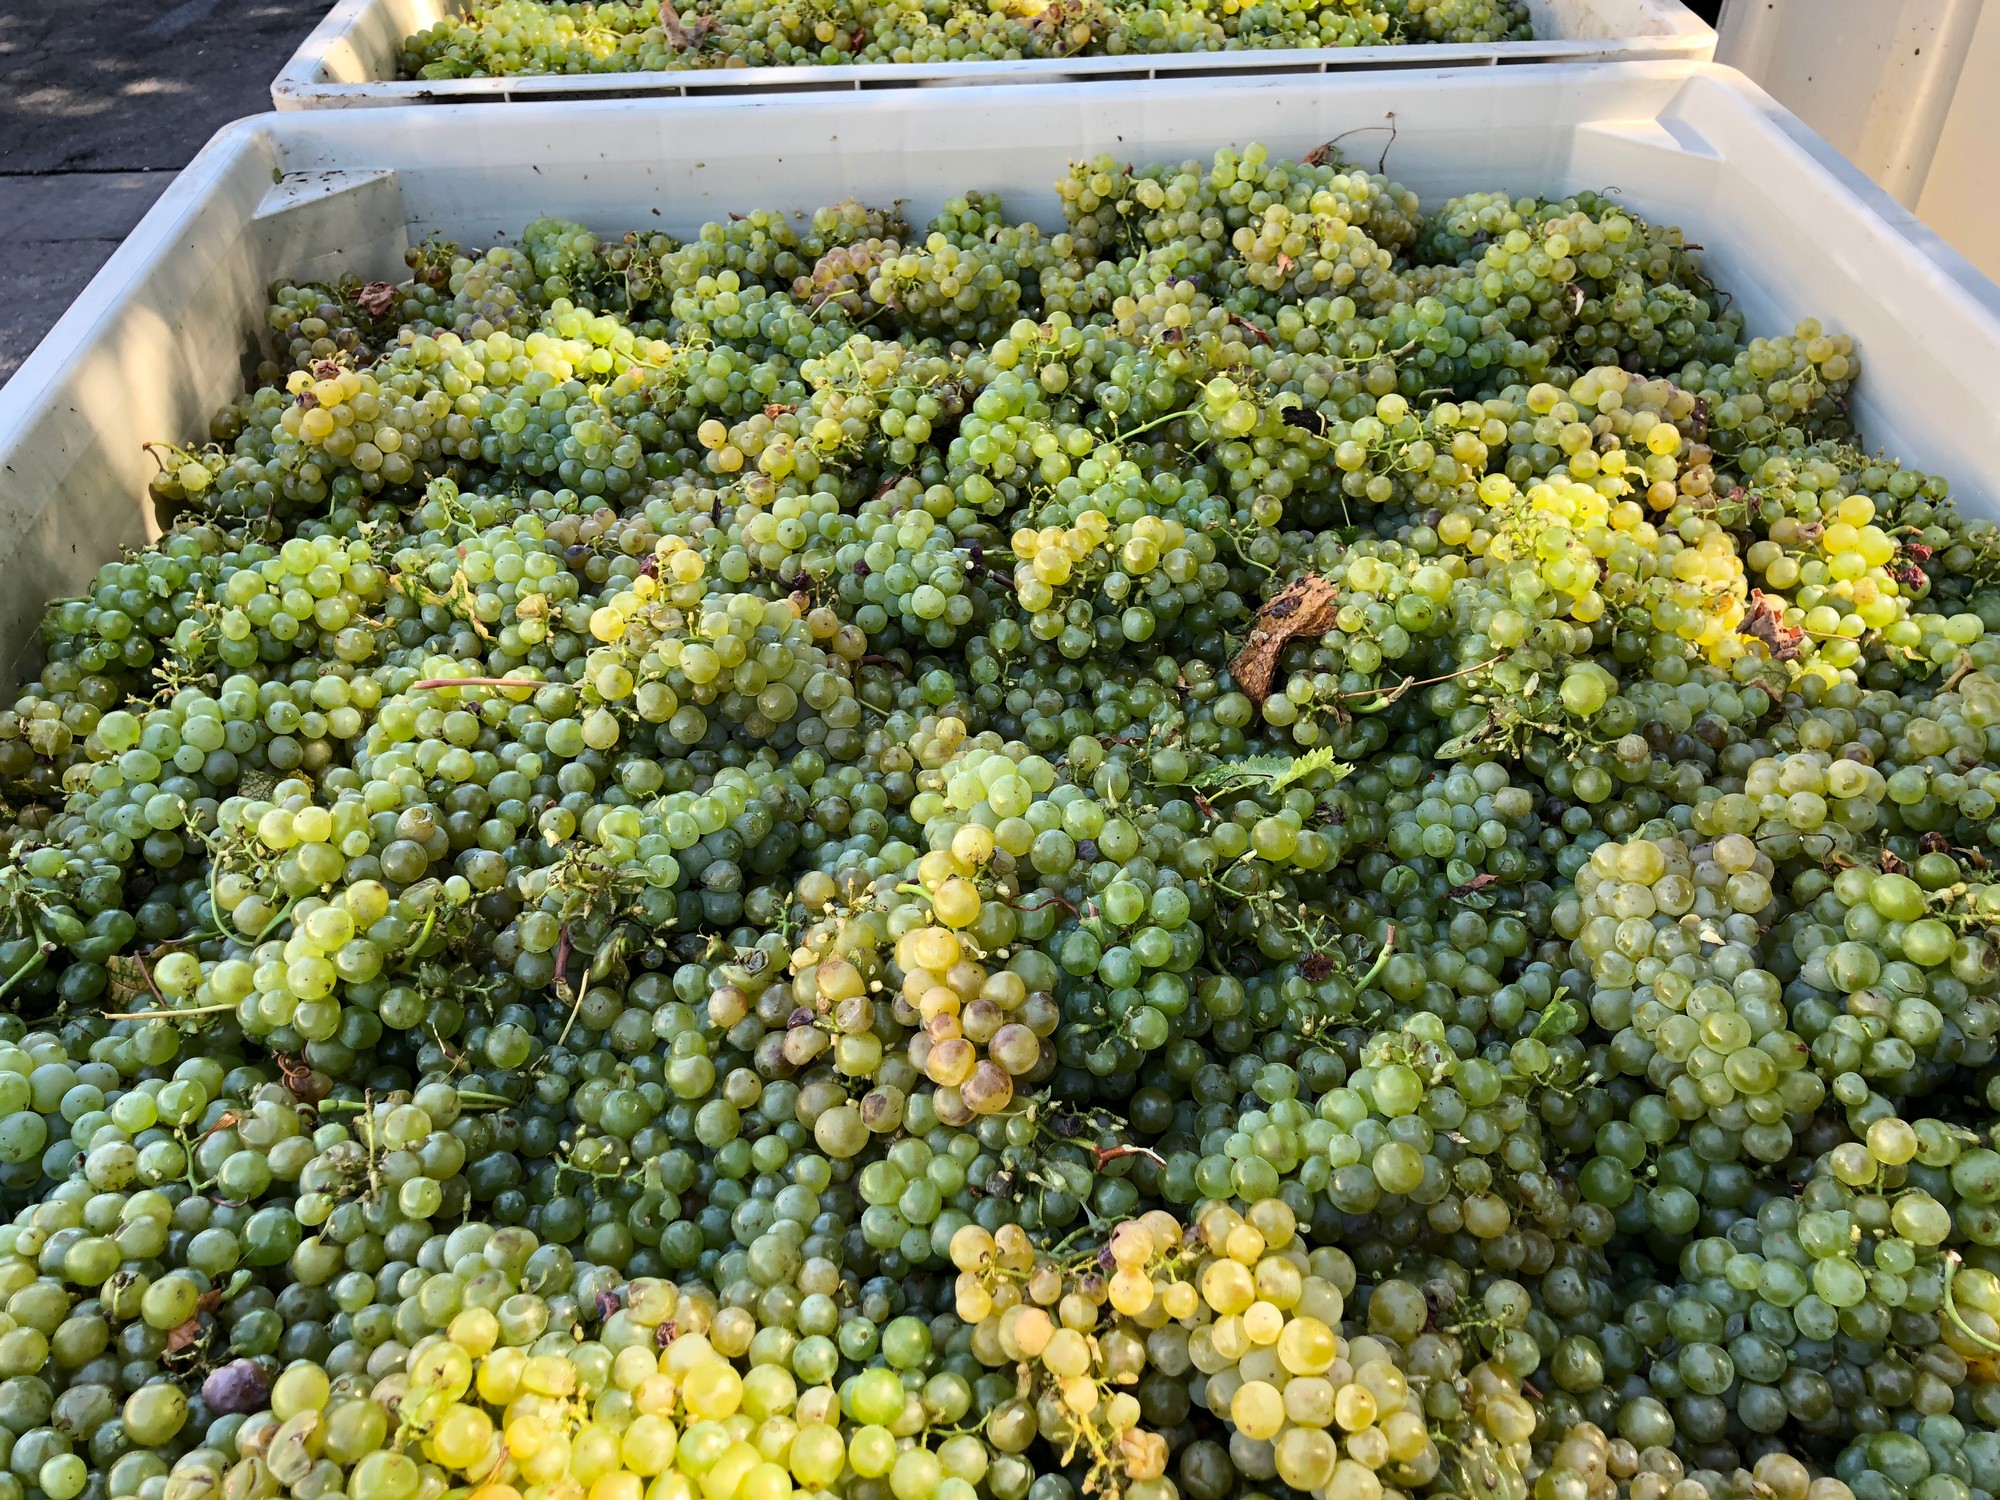 Harvested green grapes